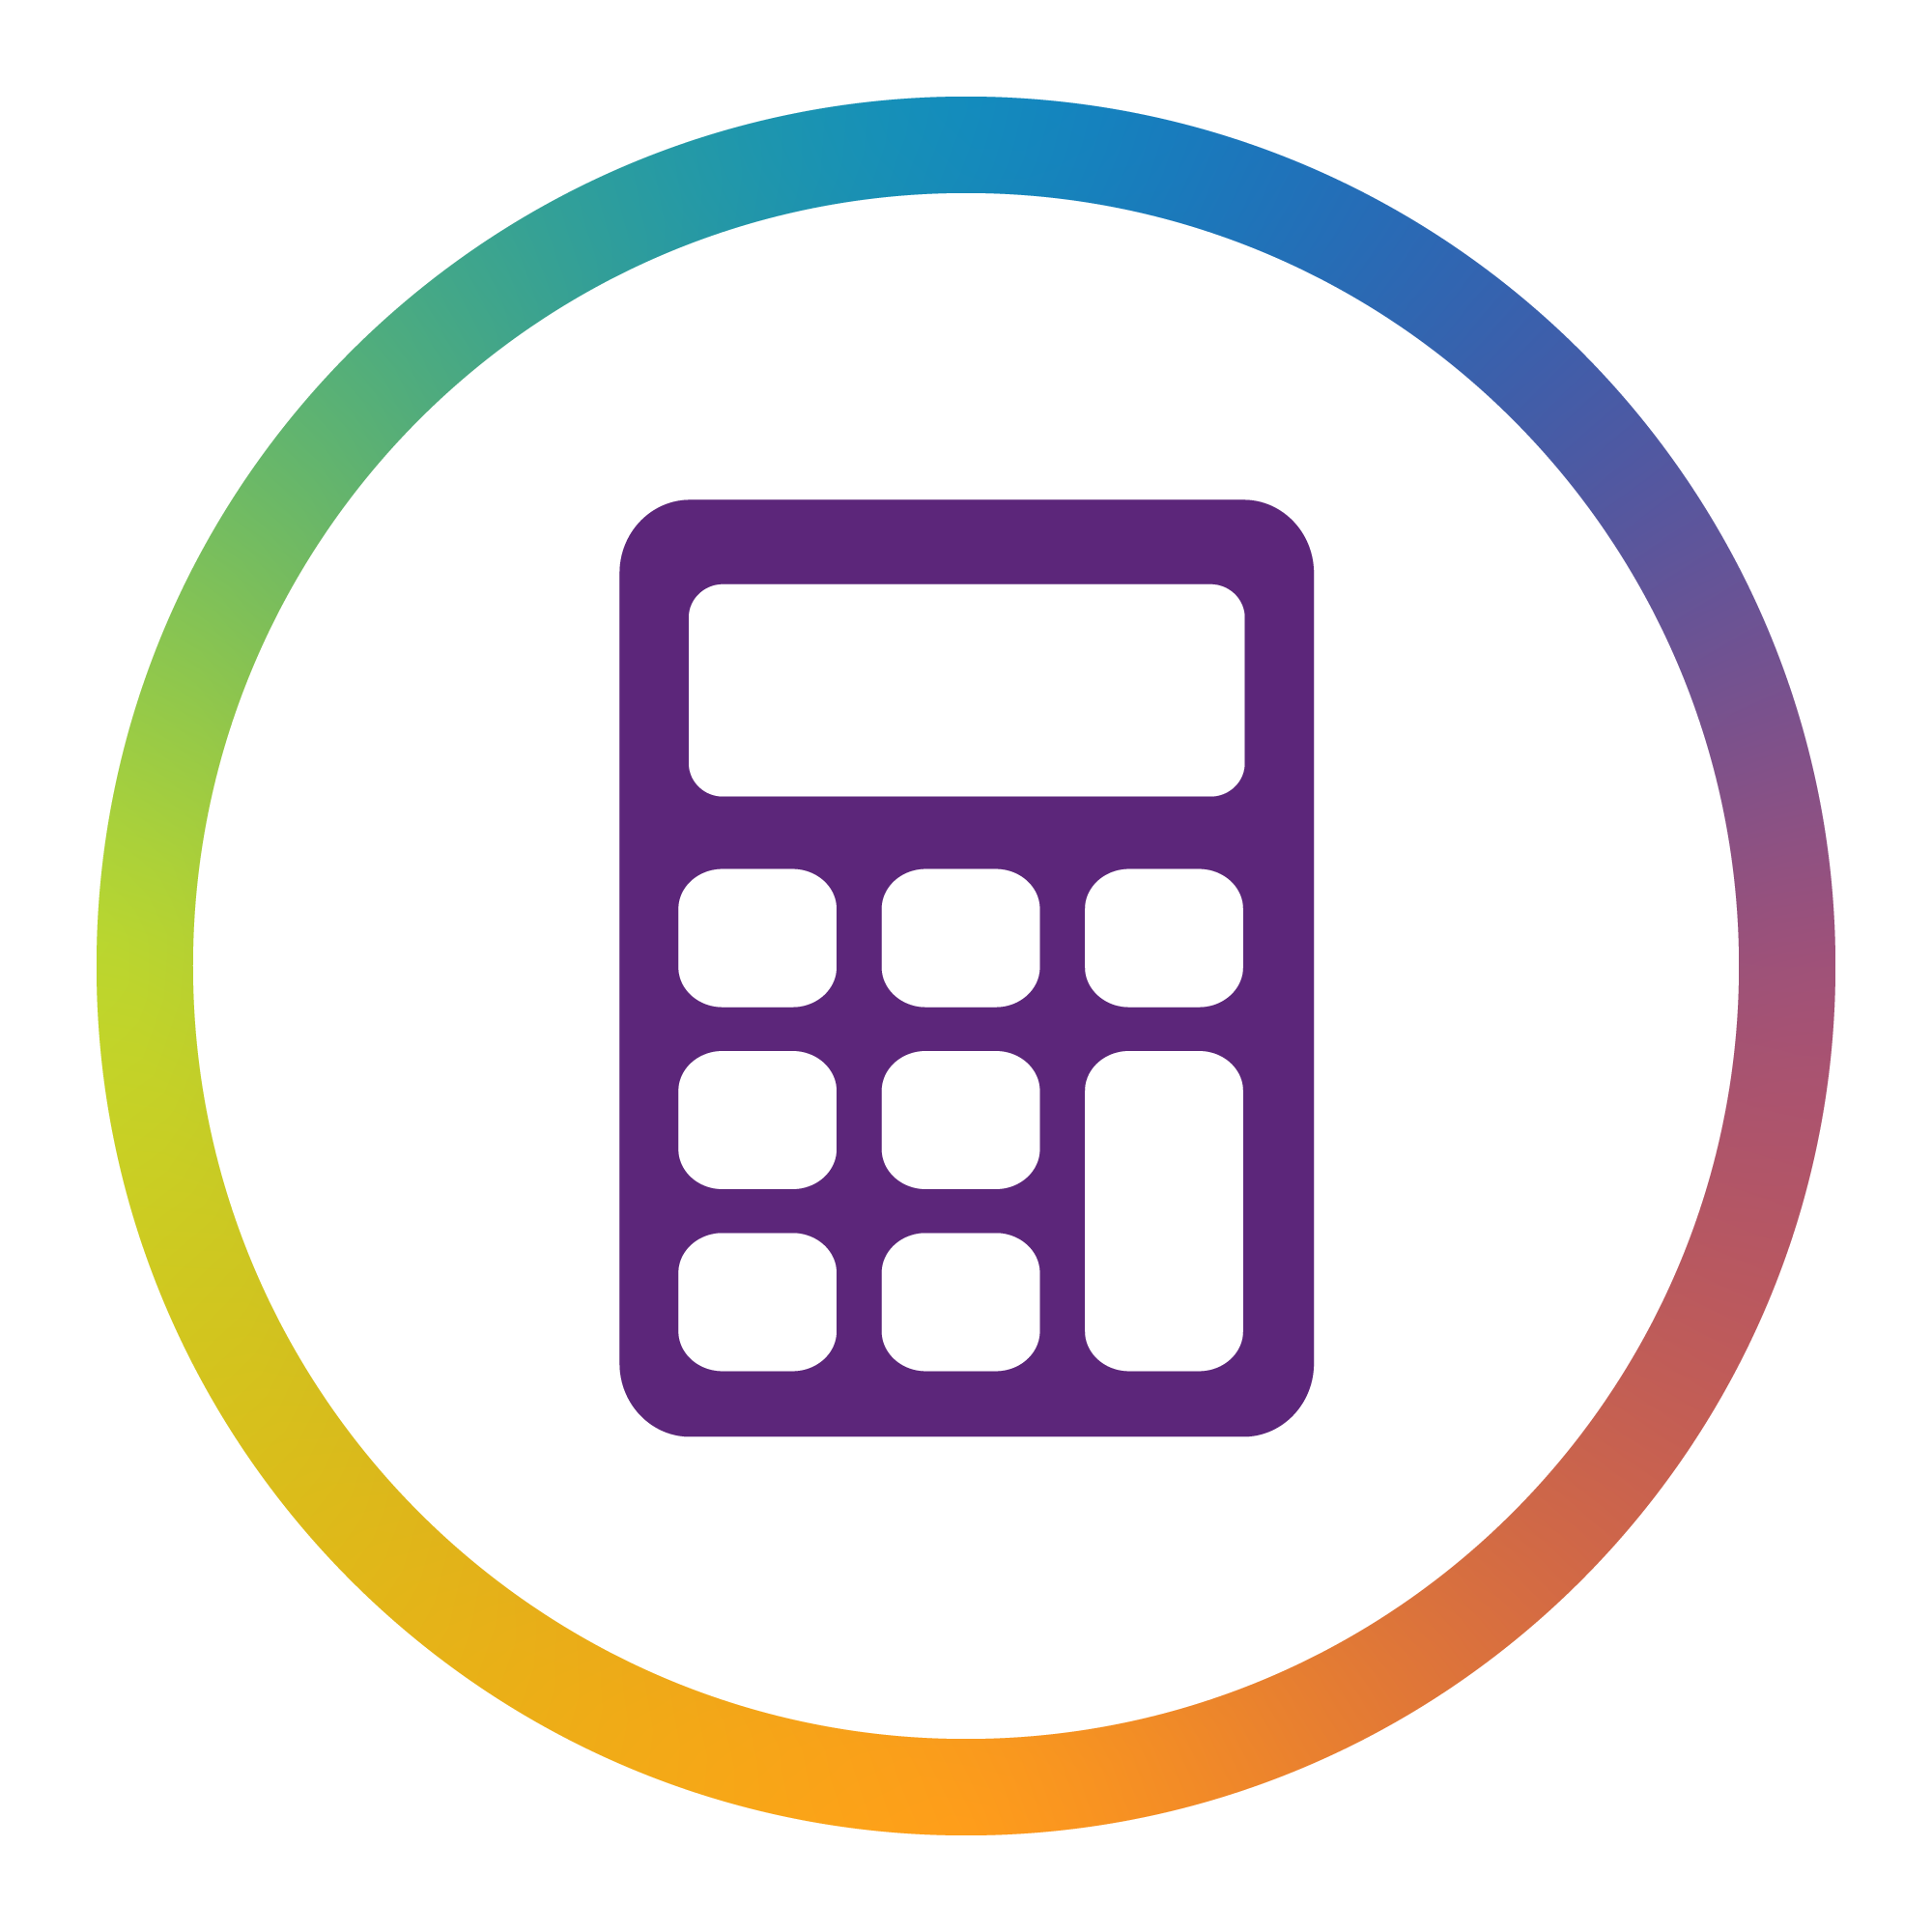 Rainbow circle with white center and at the center is a simple purple calculator icon.